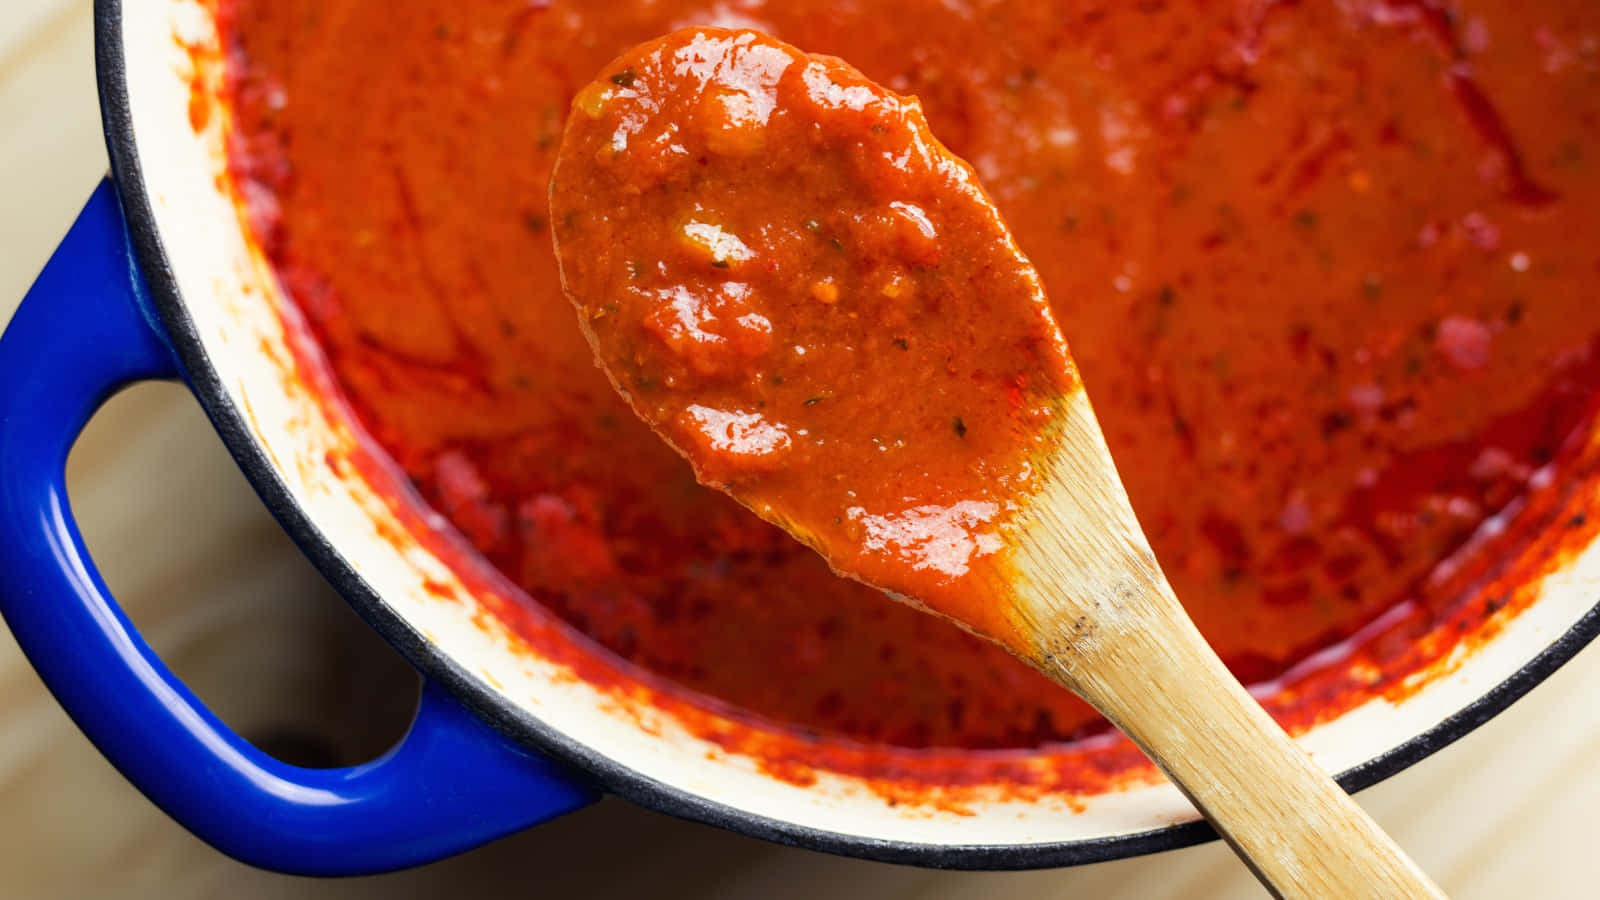 Delicious and Vibrant Red Sauce in a Pan Wallpaper